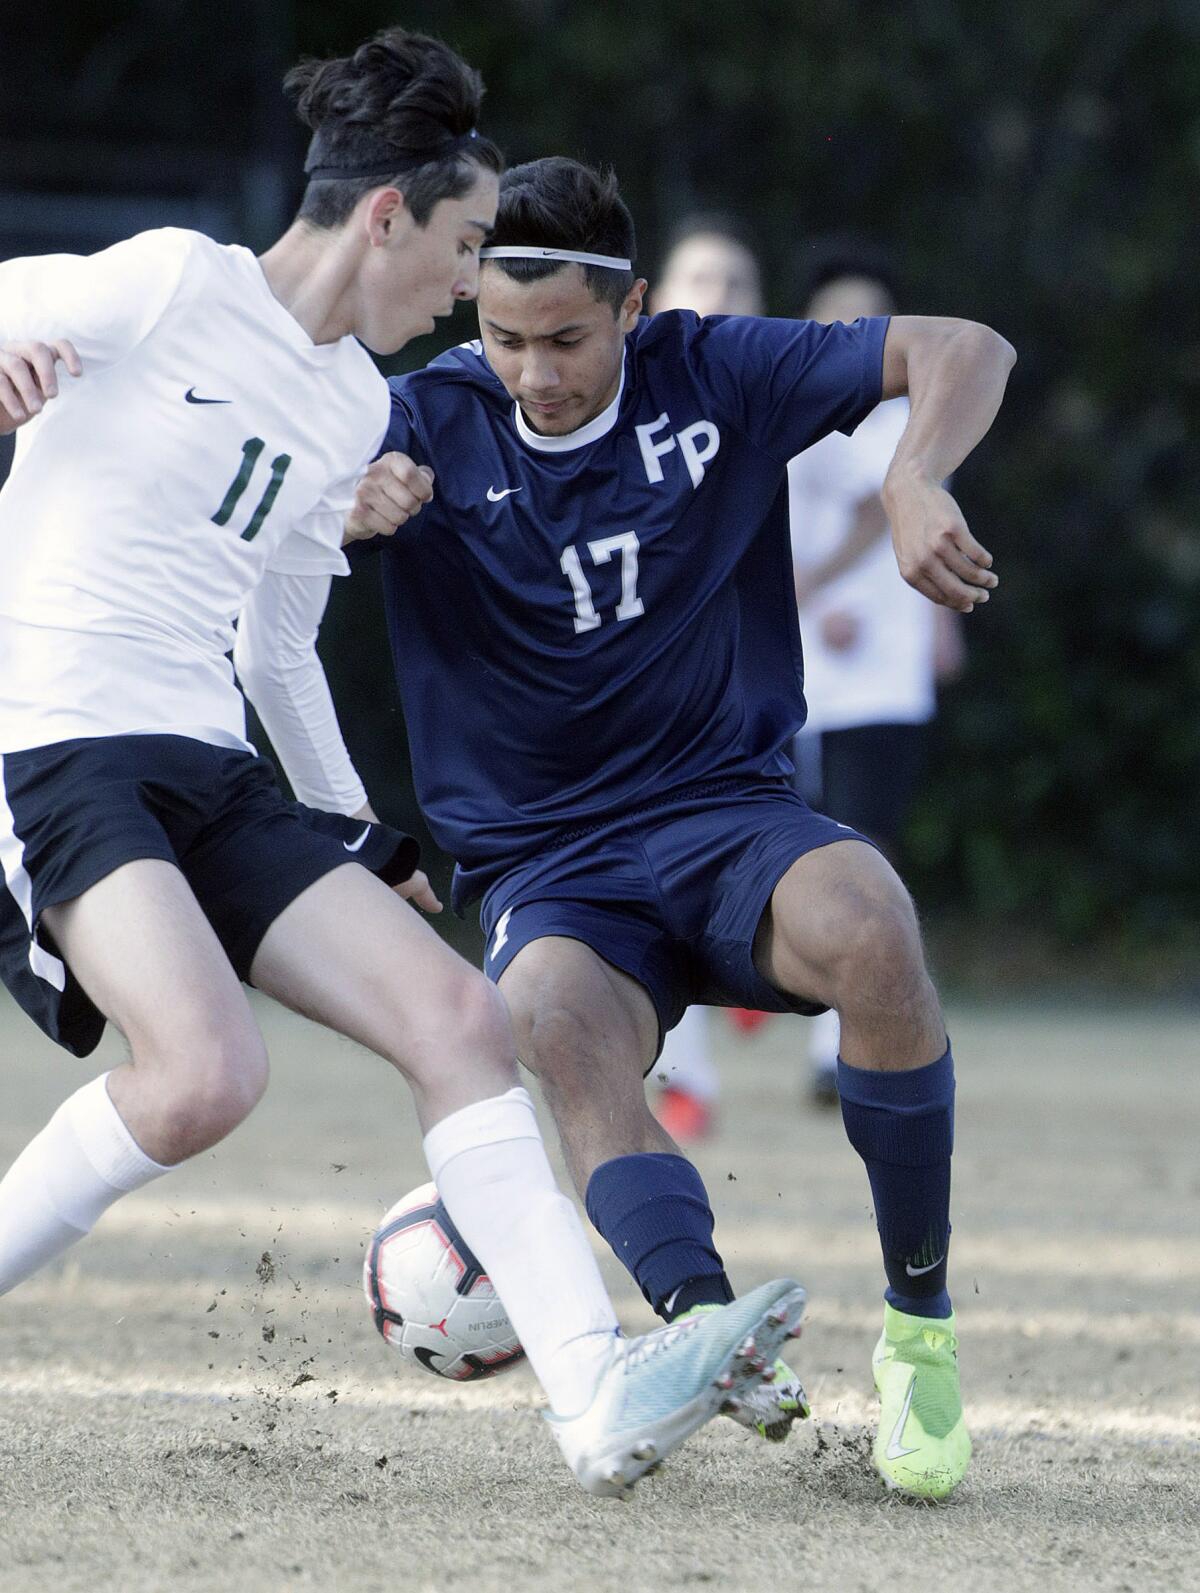 Flintridge Prep's Silas Chavez stops and cuts with the ball with Providence's Shant Avedikian defending in a Prep League boys' soccer game at Flintridge Preparatory School in La Canada Flintridge on Wednesday, January 29, 2020. Providence won the game 1-0 after scoring in the first half.